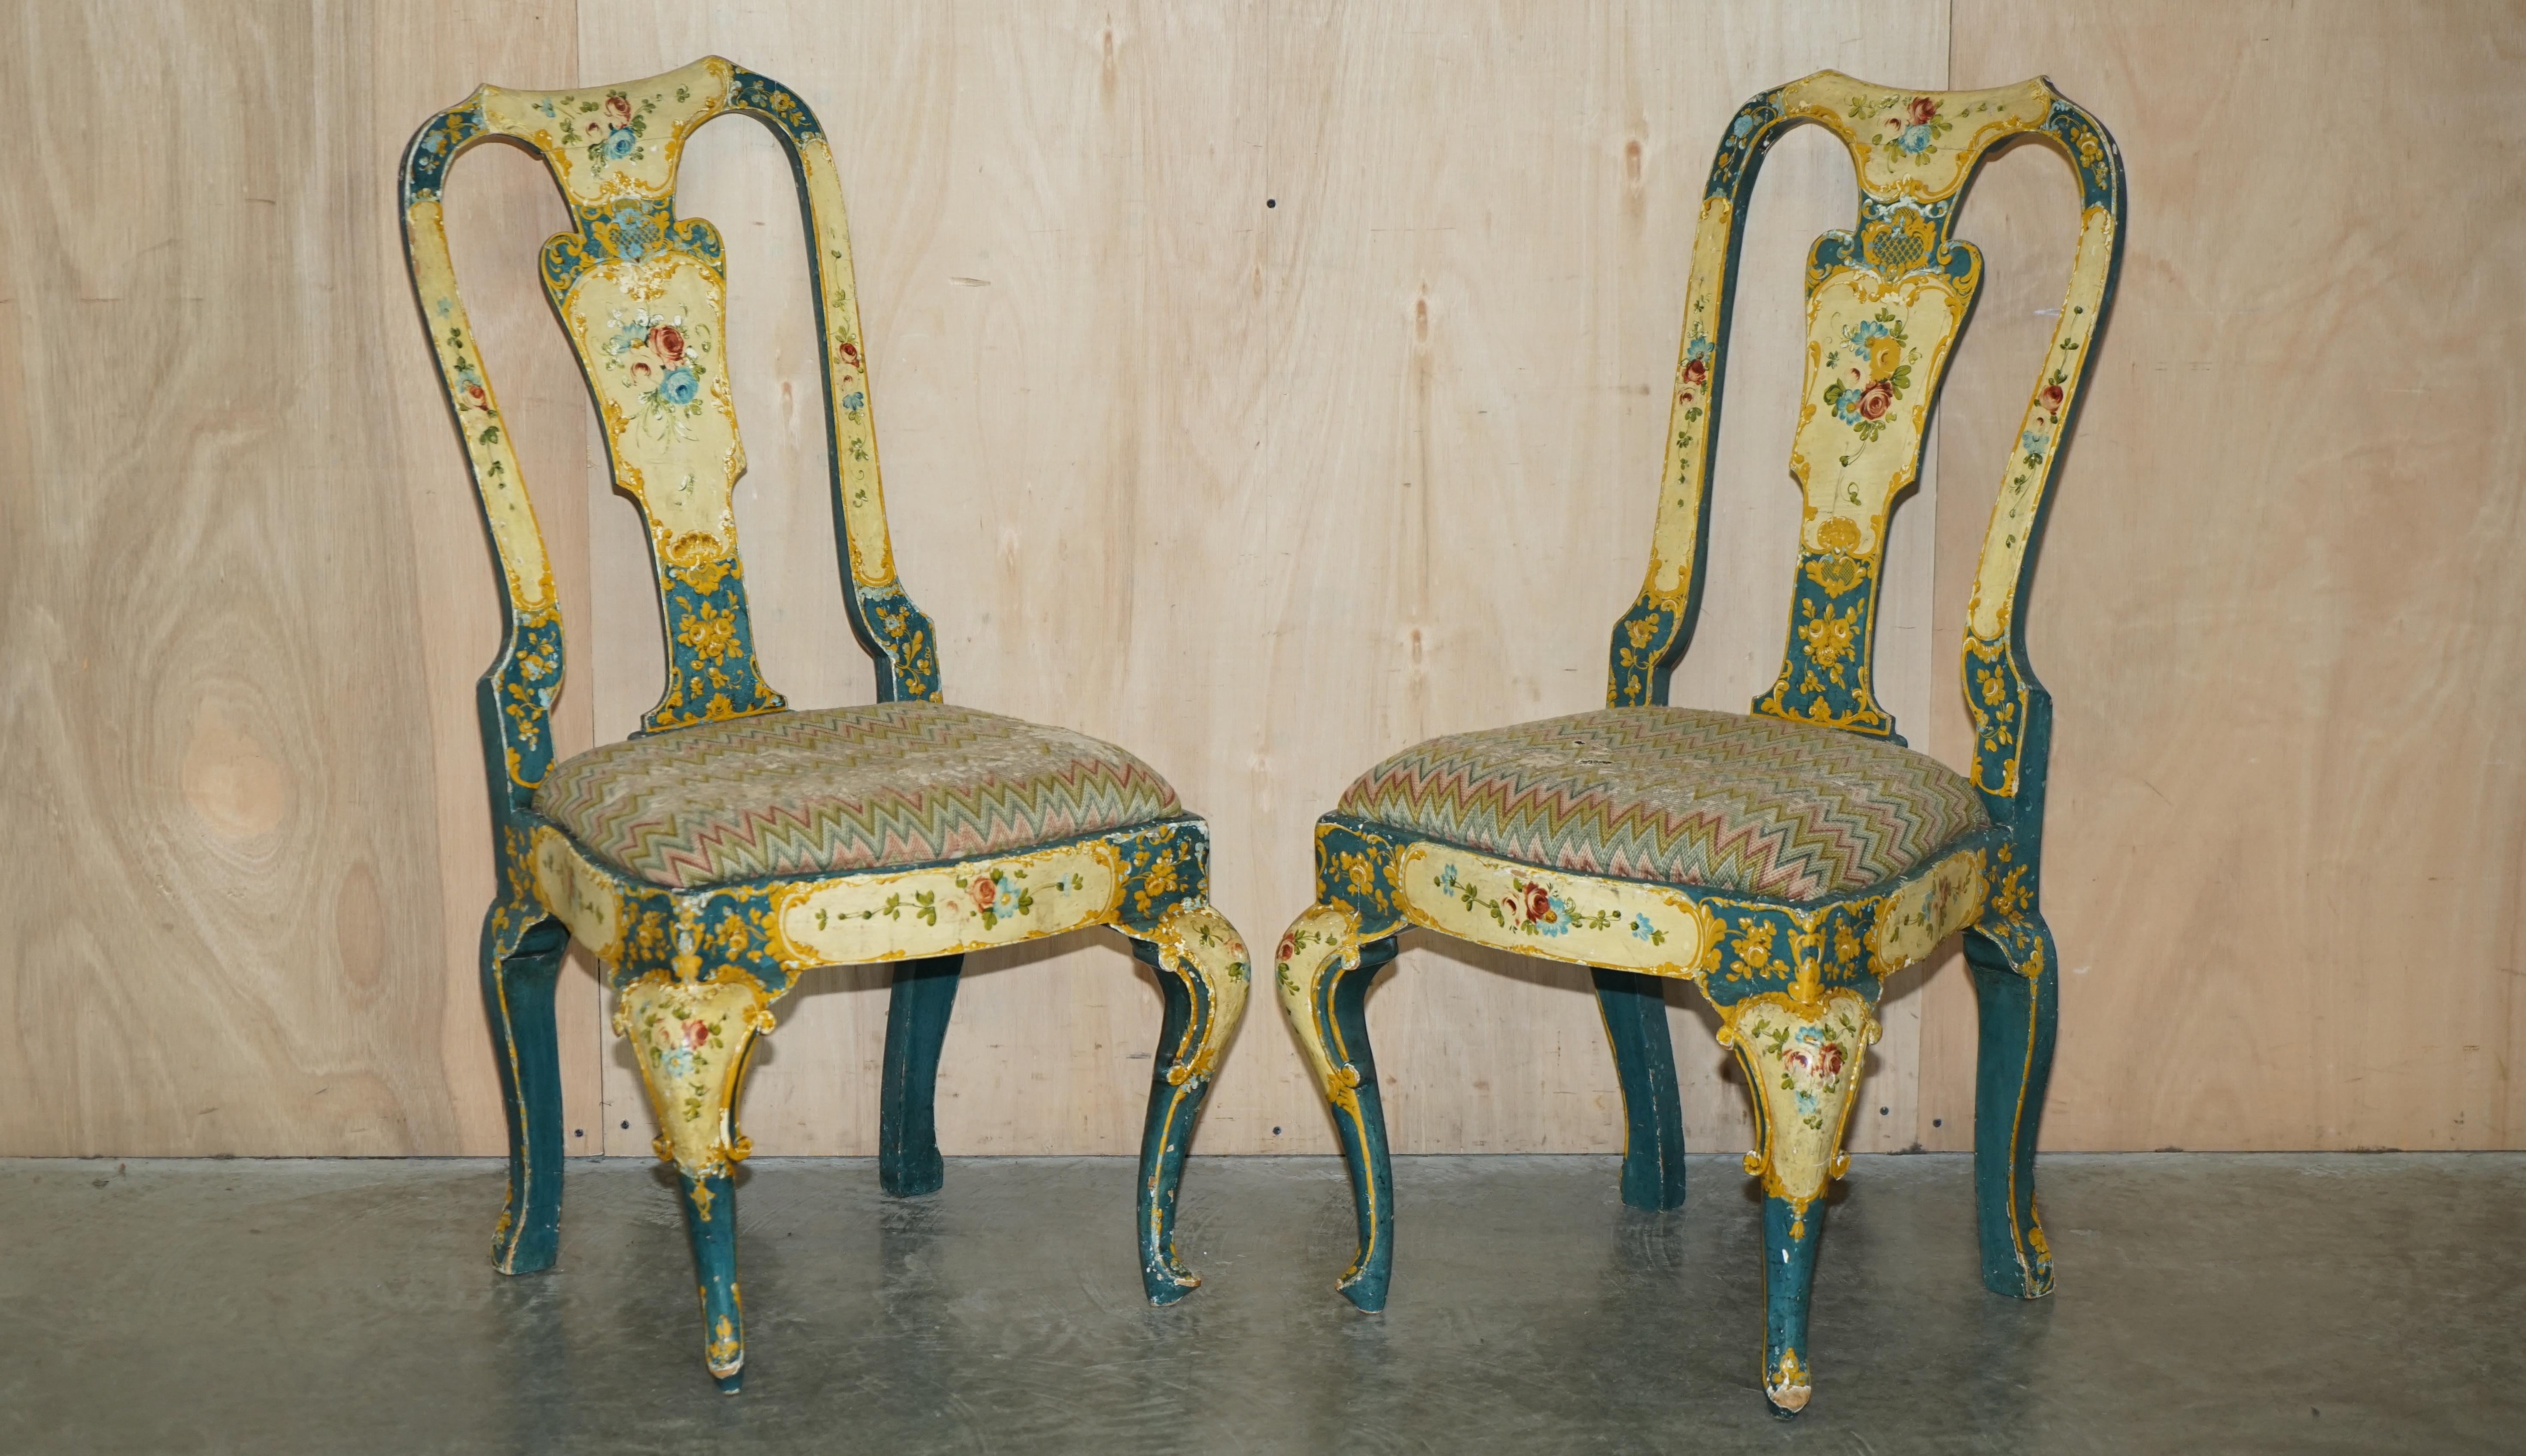 We are delighted to offer for sale this stunning and exceptionally rare suite of two Queen Anne style side chairs with a matching occasional table in the original floral paint circa 1810-1820 which came from the 300 year old Glenalamond House,